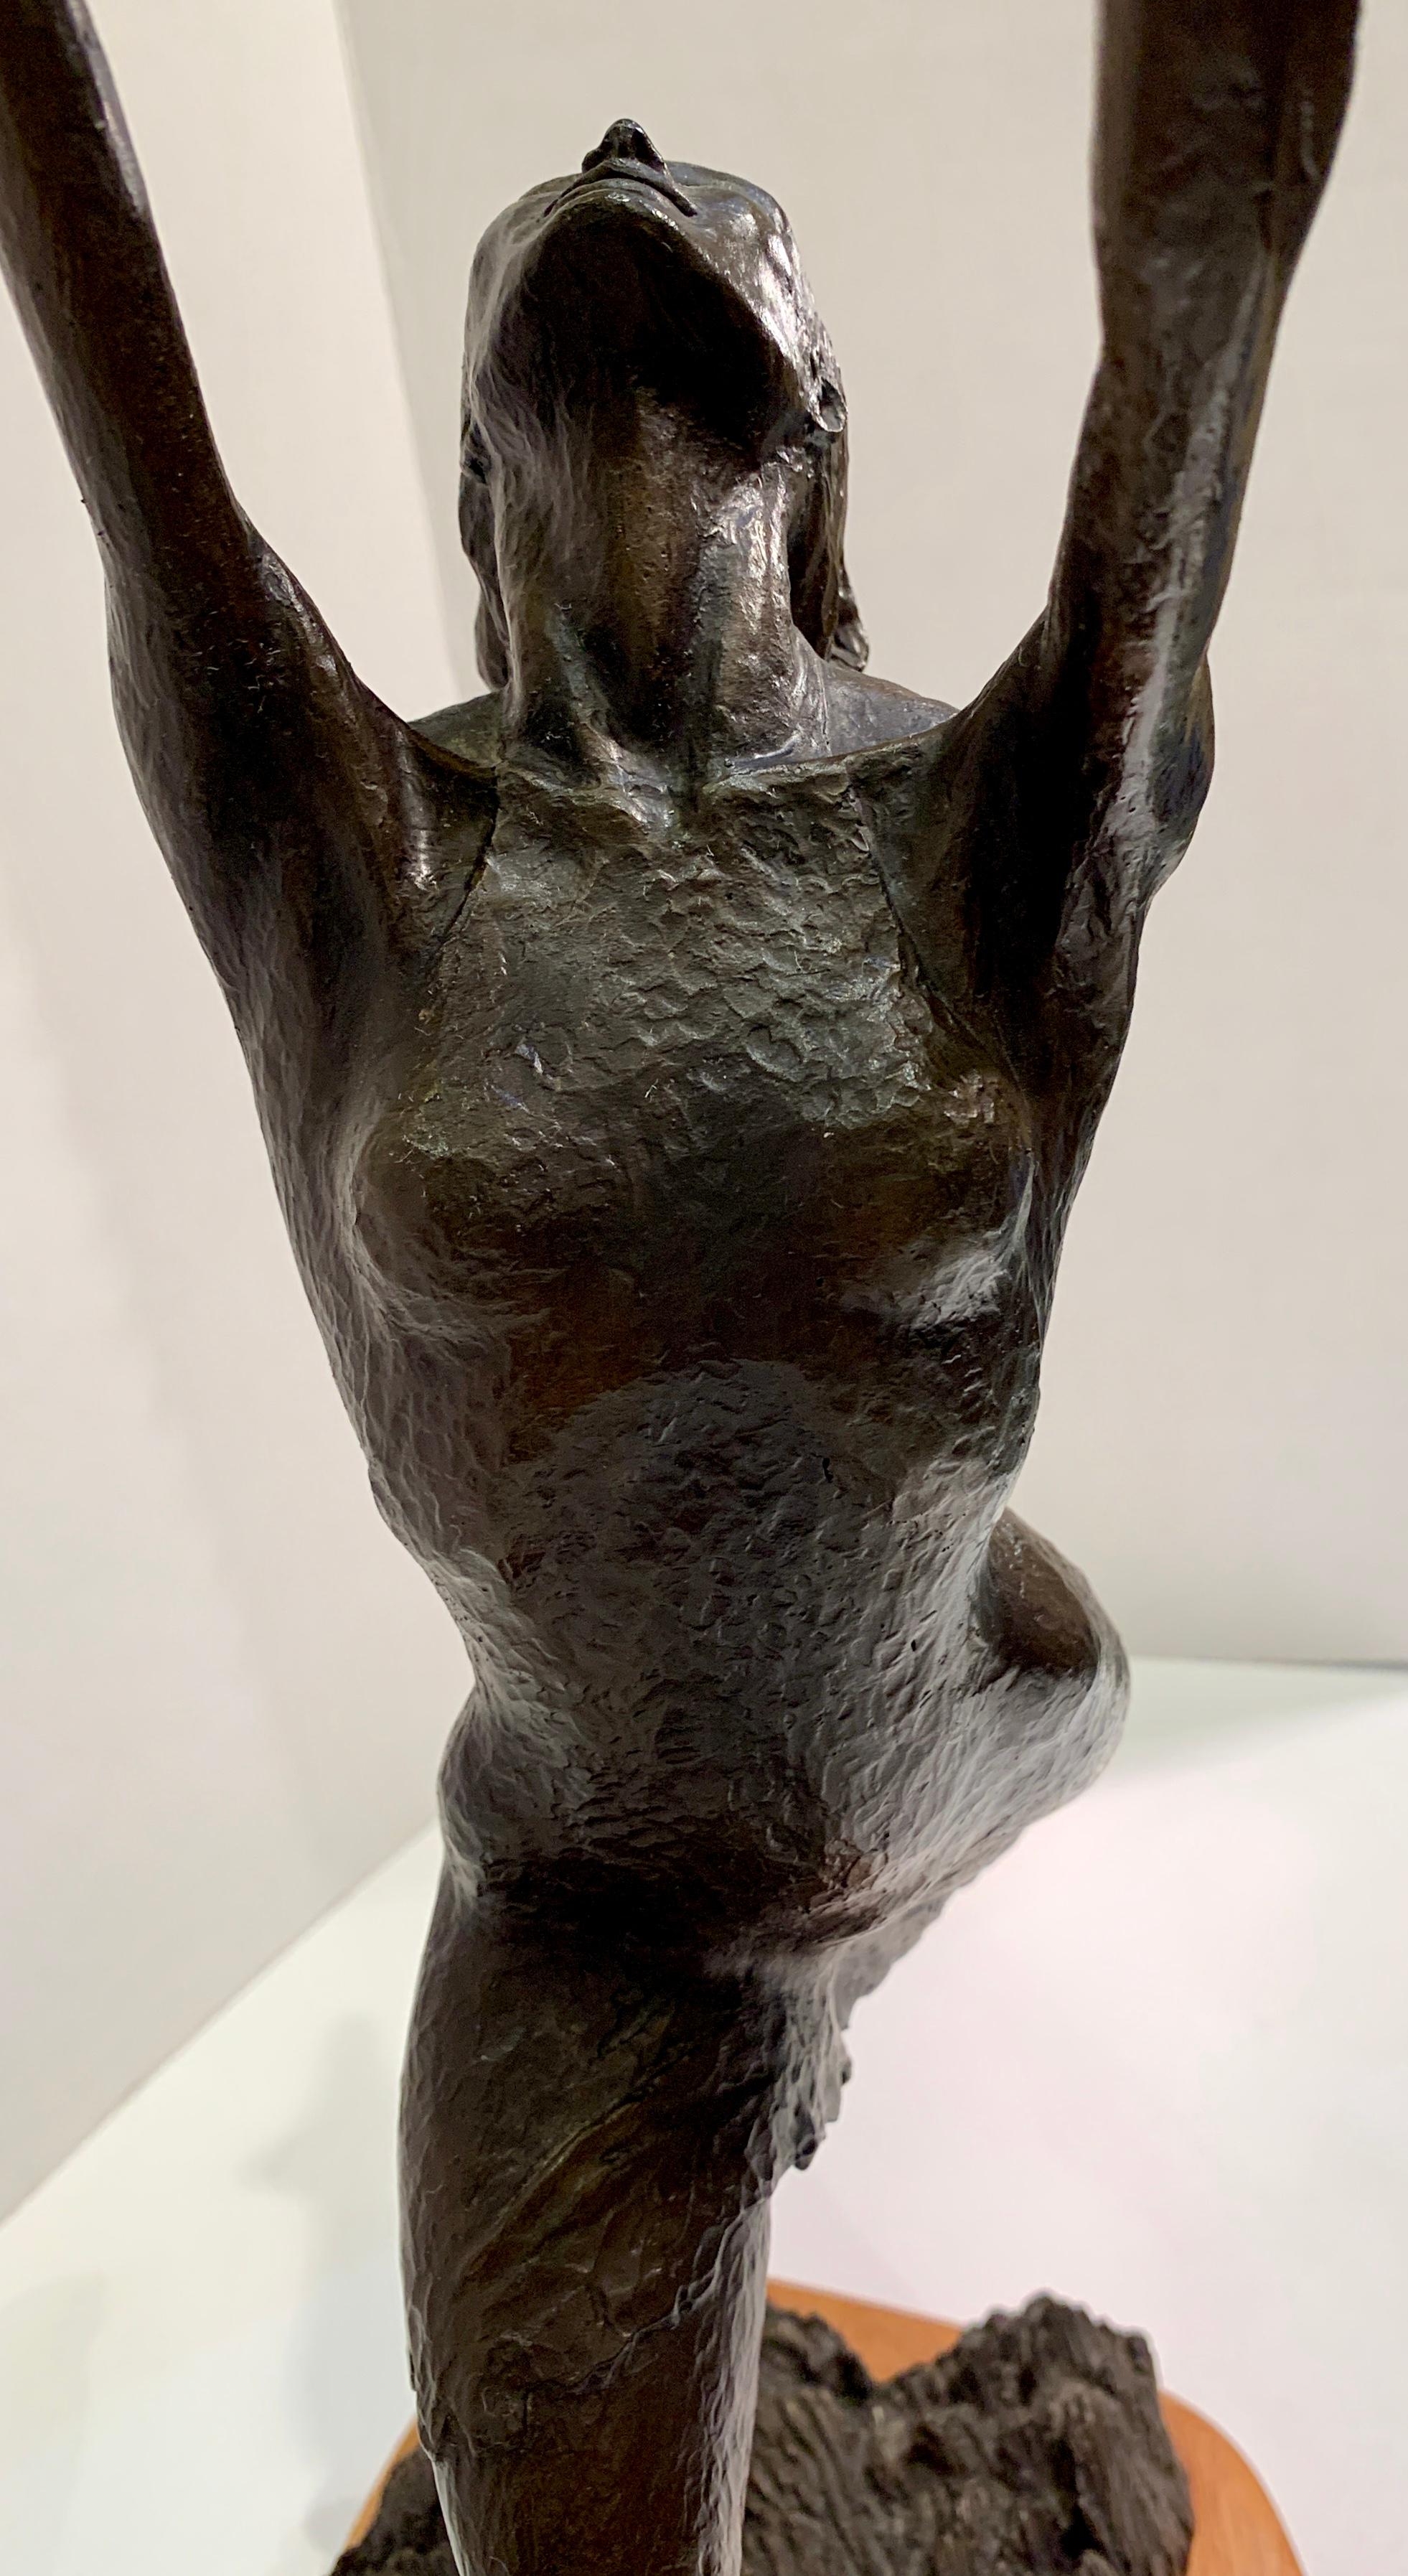 Art Deco Style Bronze Sculpture of a Woman Reaching for Seagulls by M. Young 8